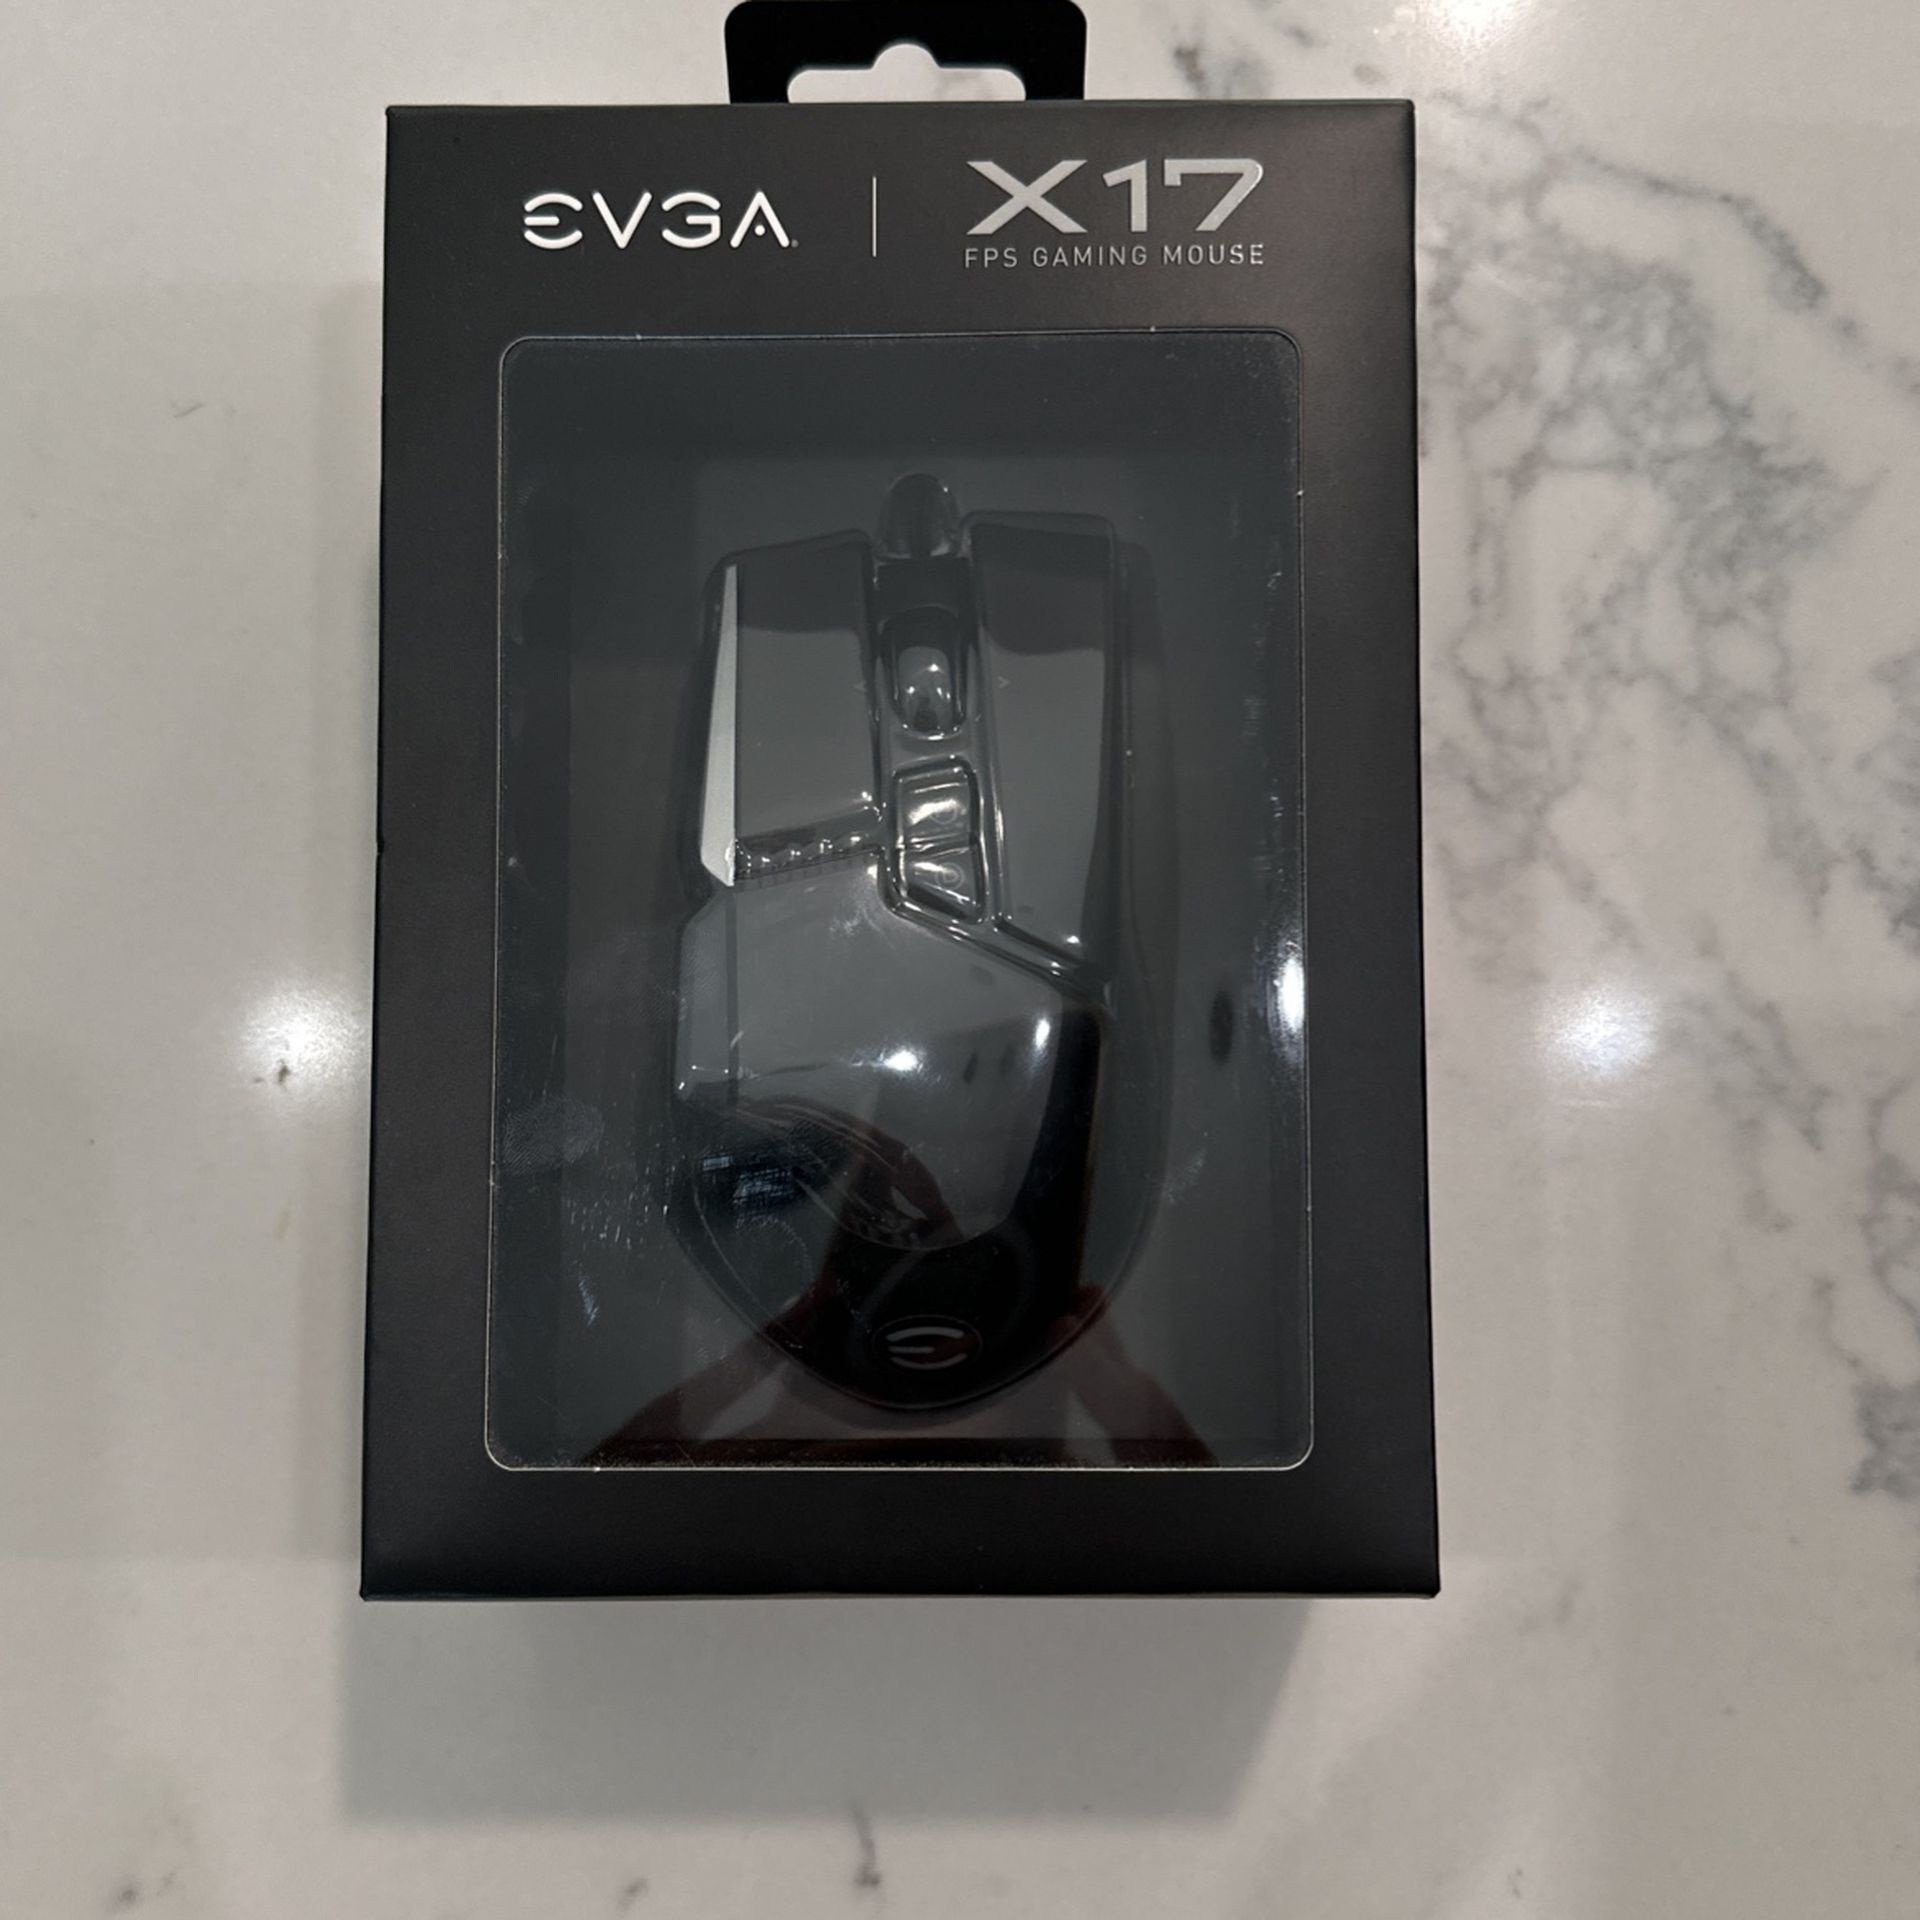 Evga X17 FPS Gaming Mouse (new)